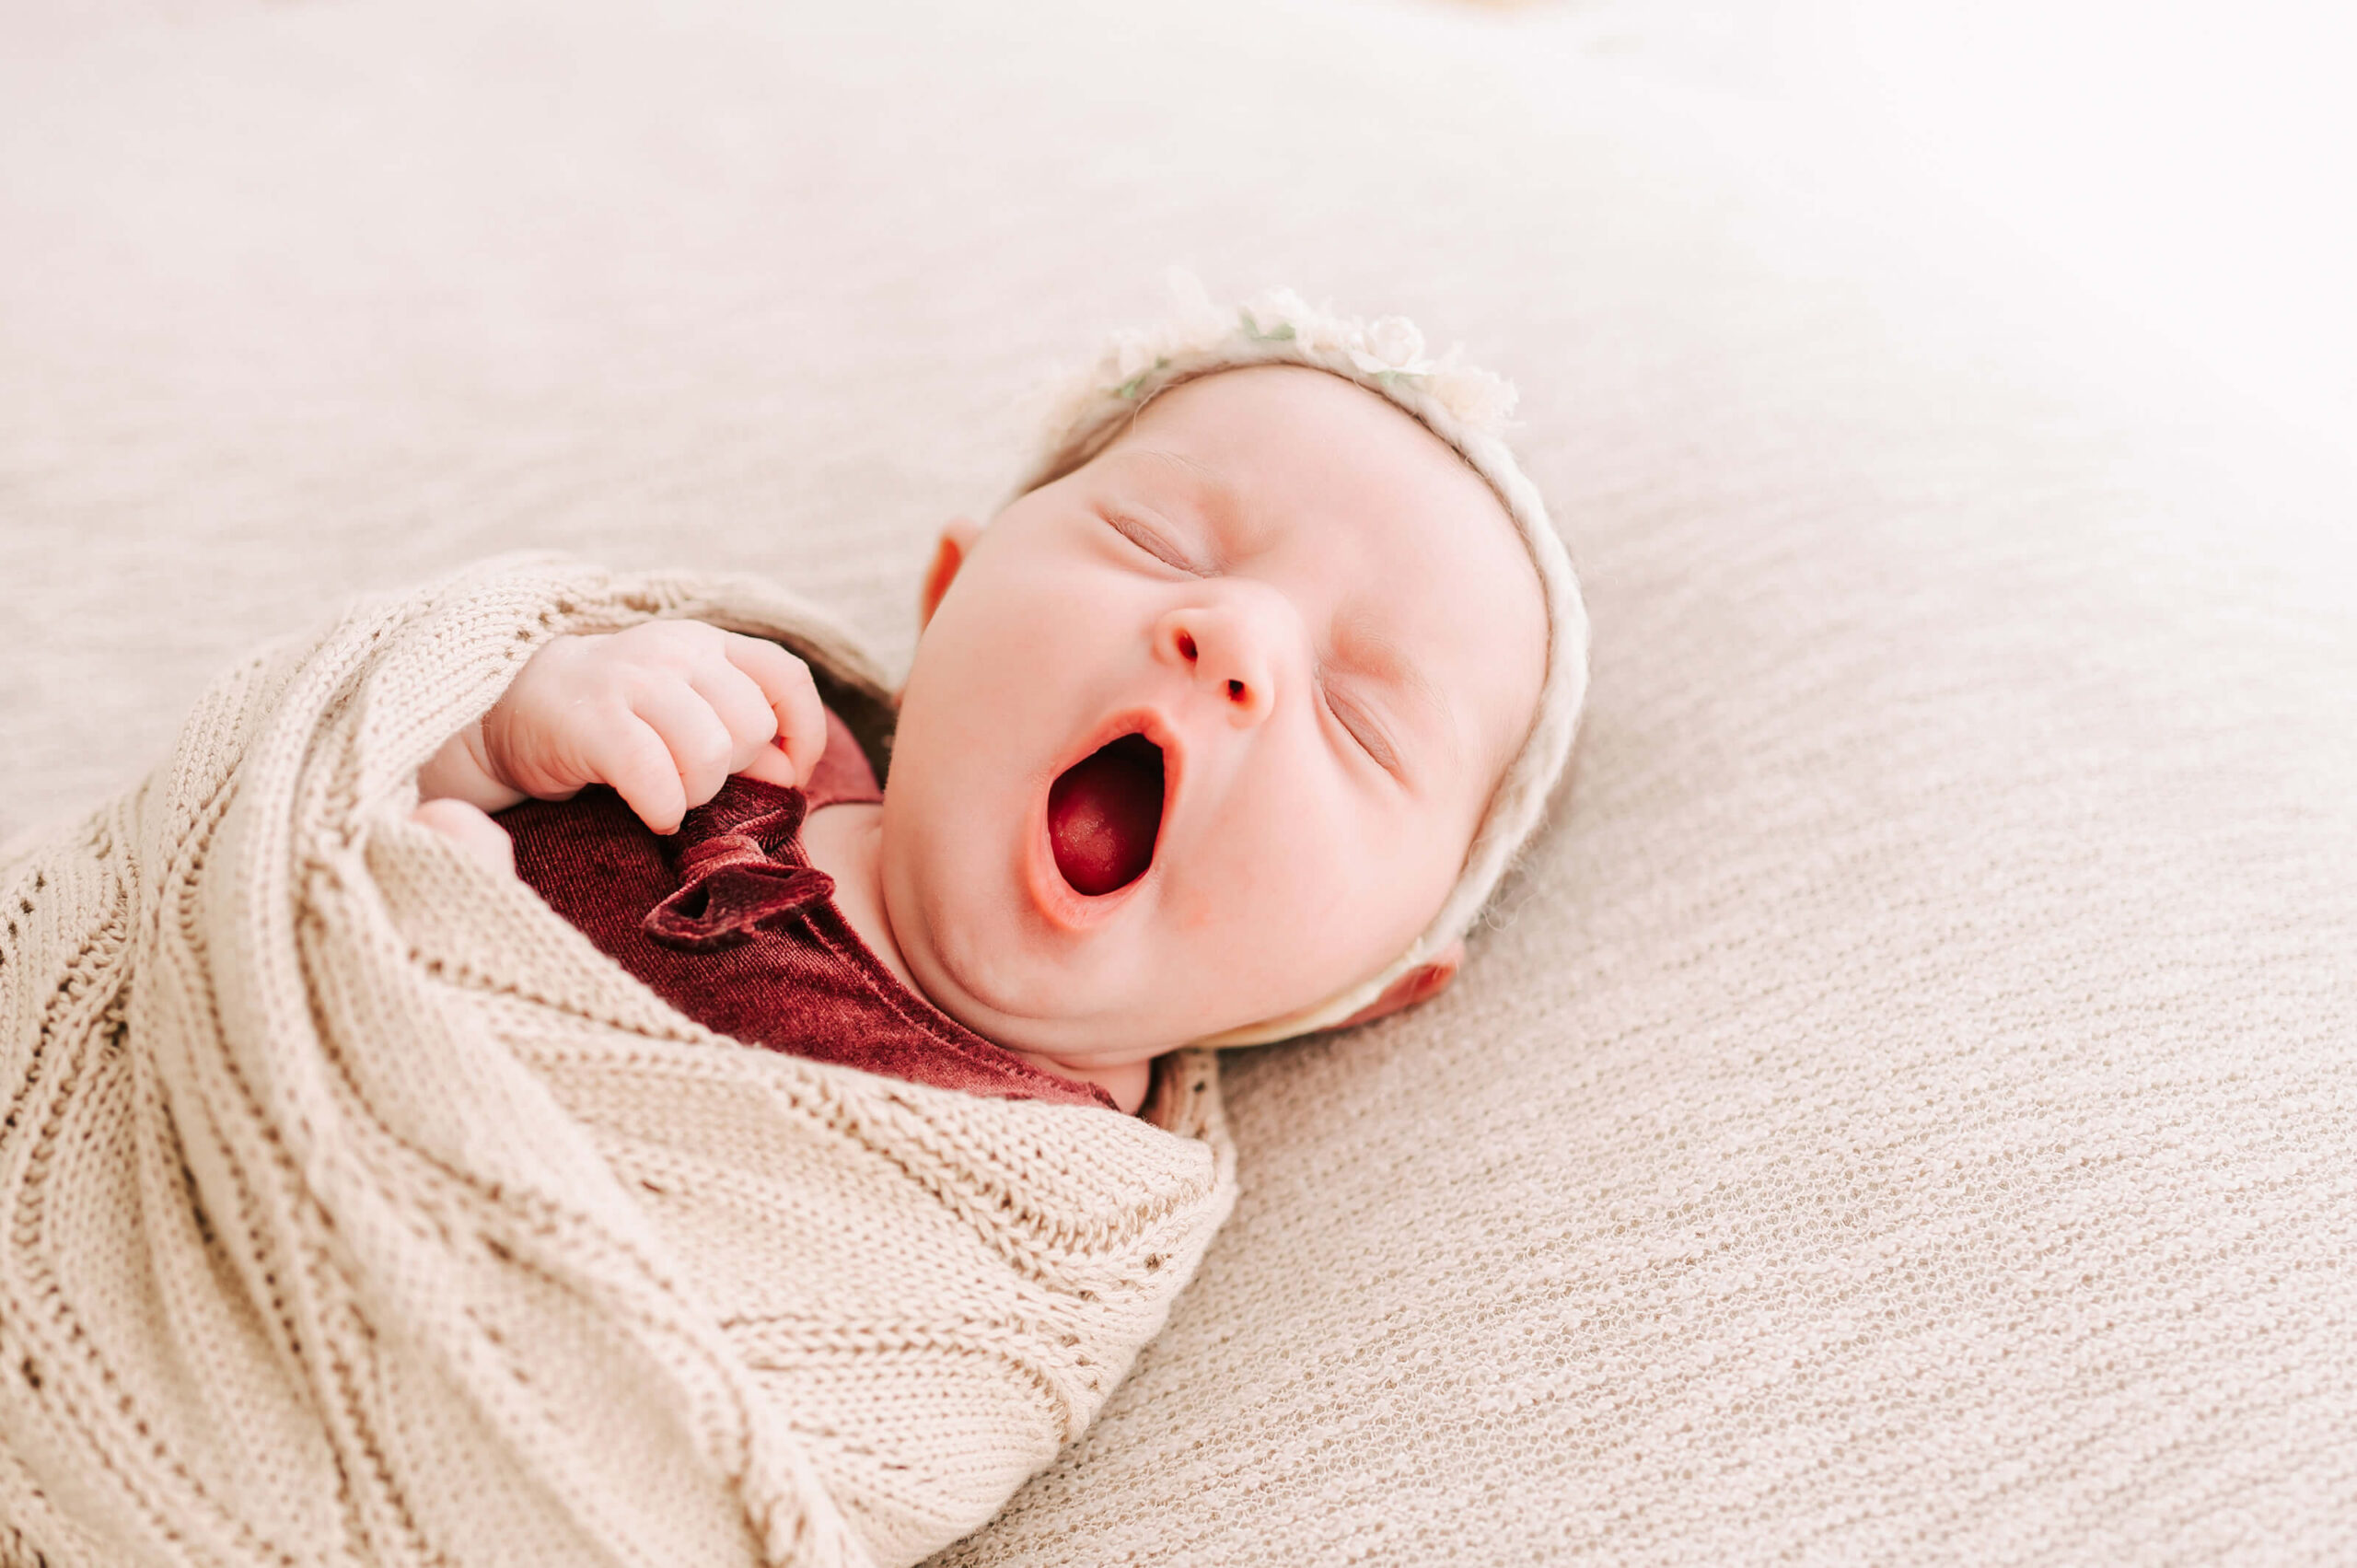 newborn baby girl yawning editing learned in photography business course